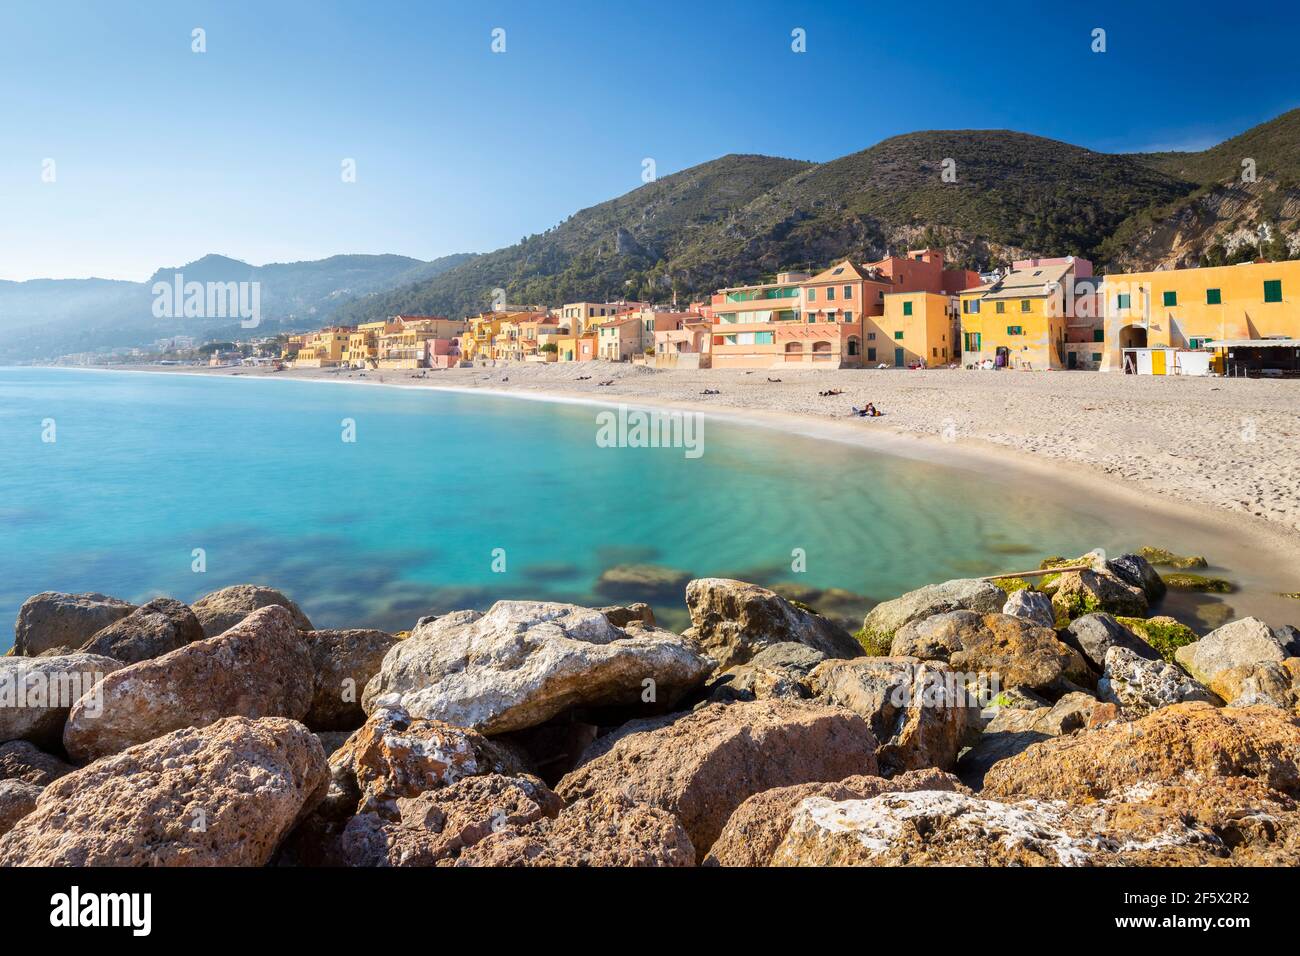 View of the colorful houses and the beach of Varigotti, Finale Ligure, Savona district, Ponente Riviera, Liguria, Italy. Stock Photo